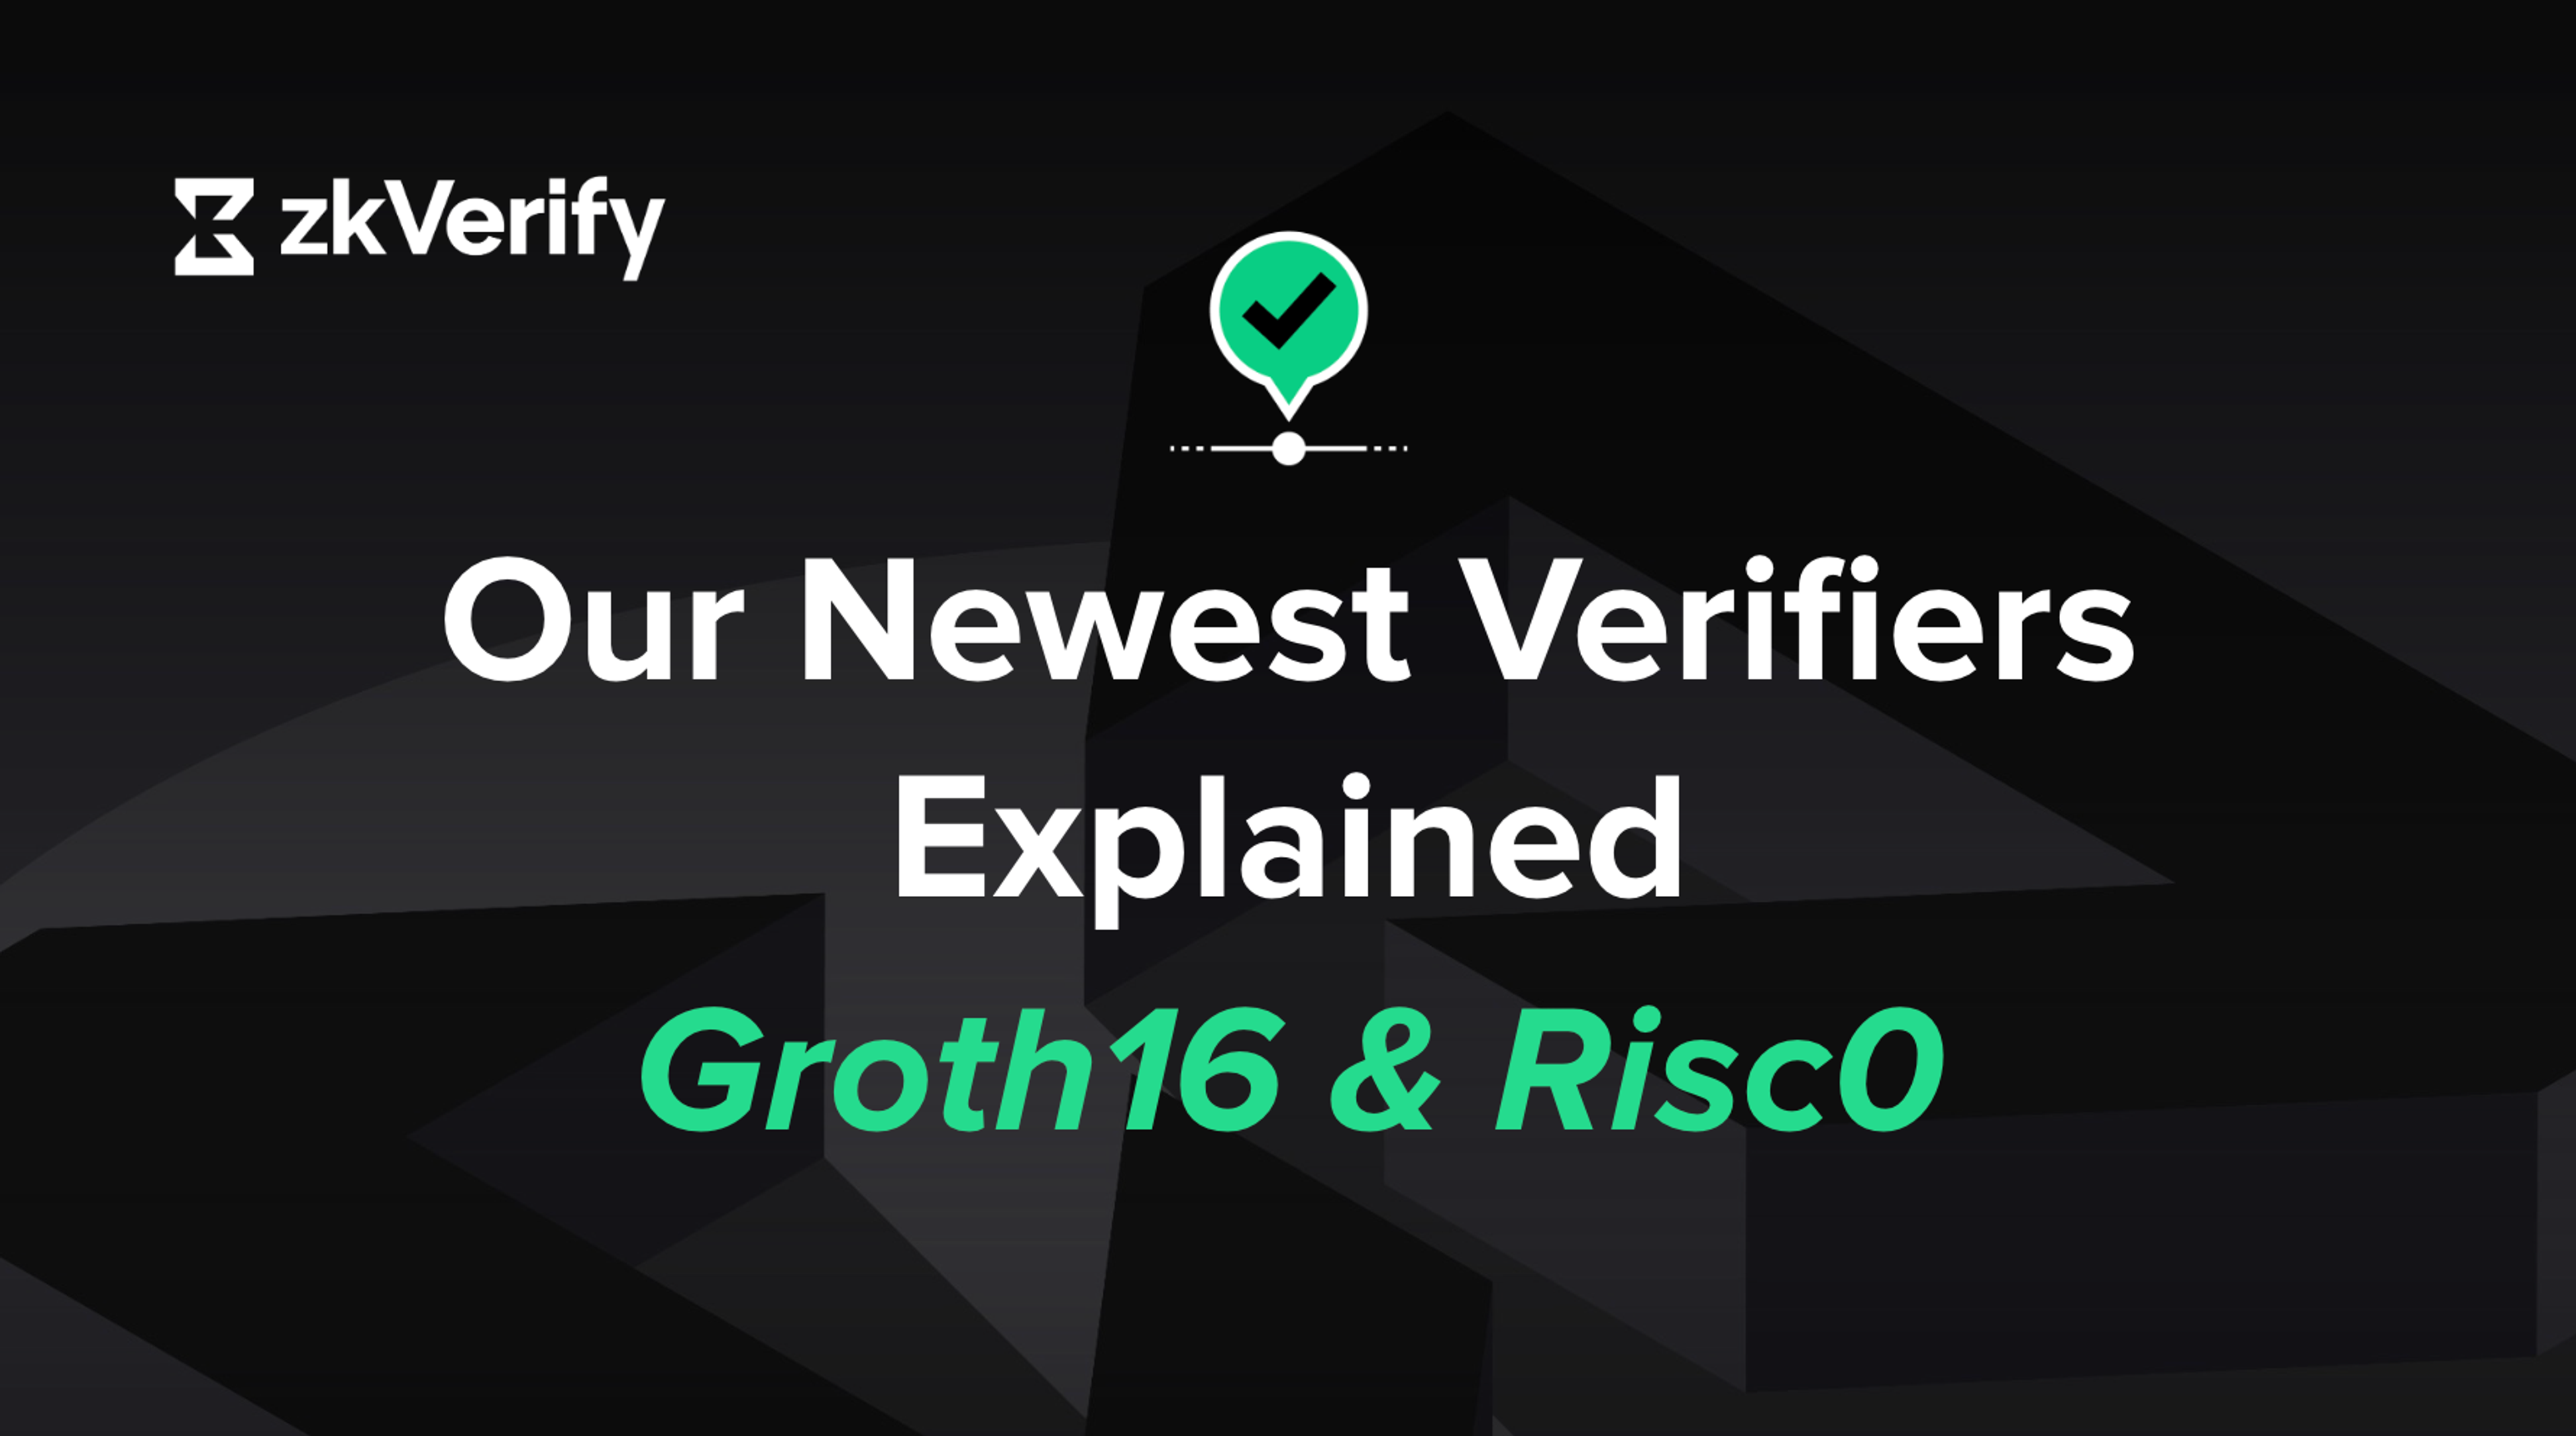 Our Newest Verifiers Explained - Groth16 & Risc0